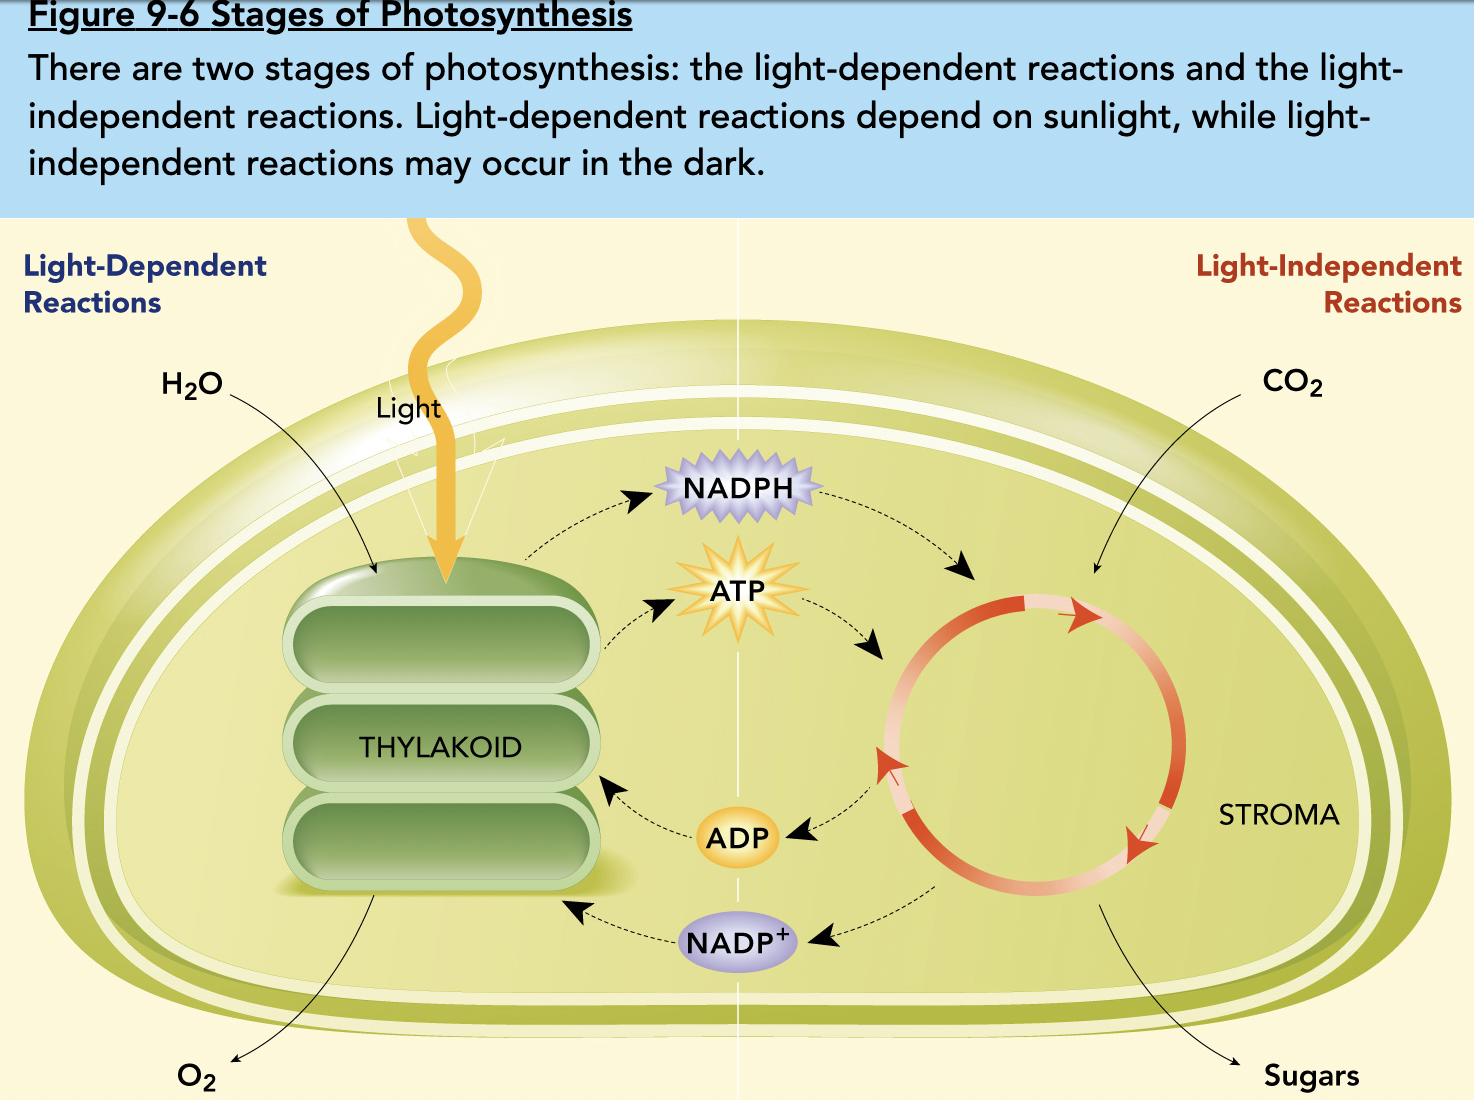 light-dependent and light-independent reactions have  an interdependent relationship